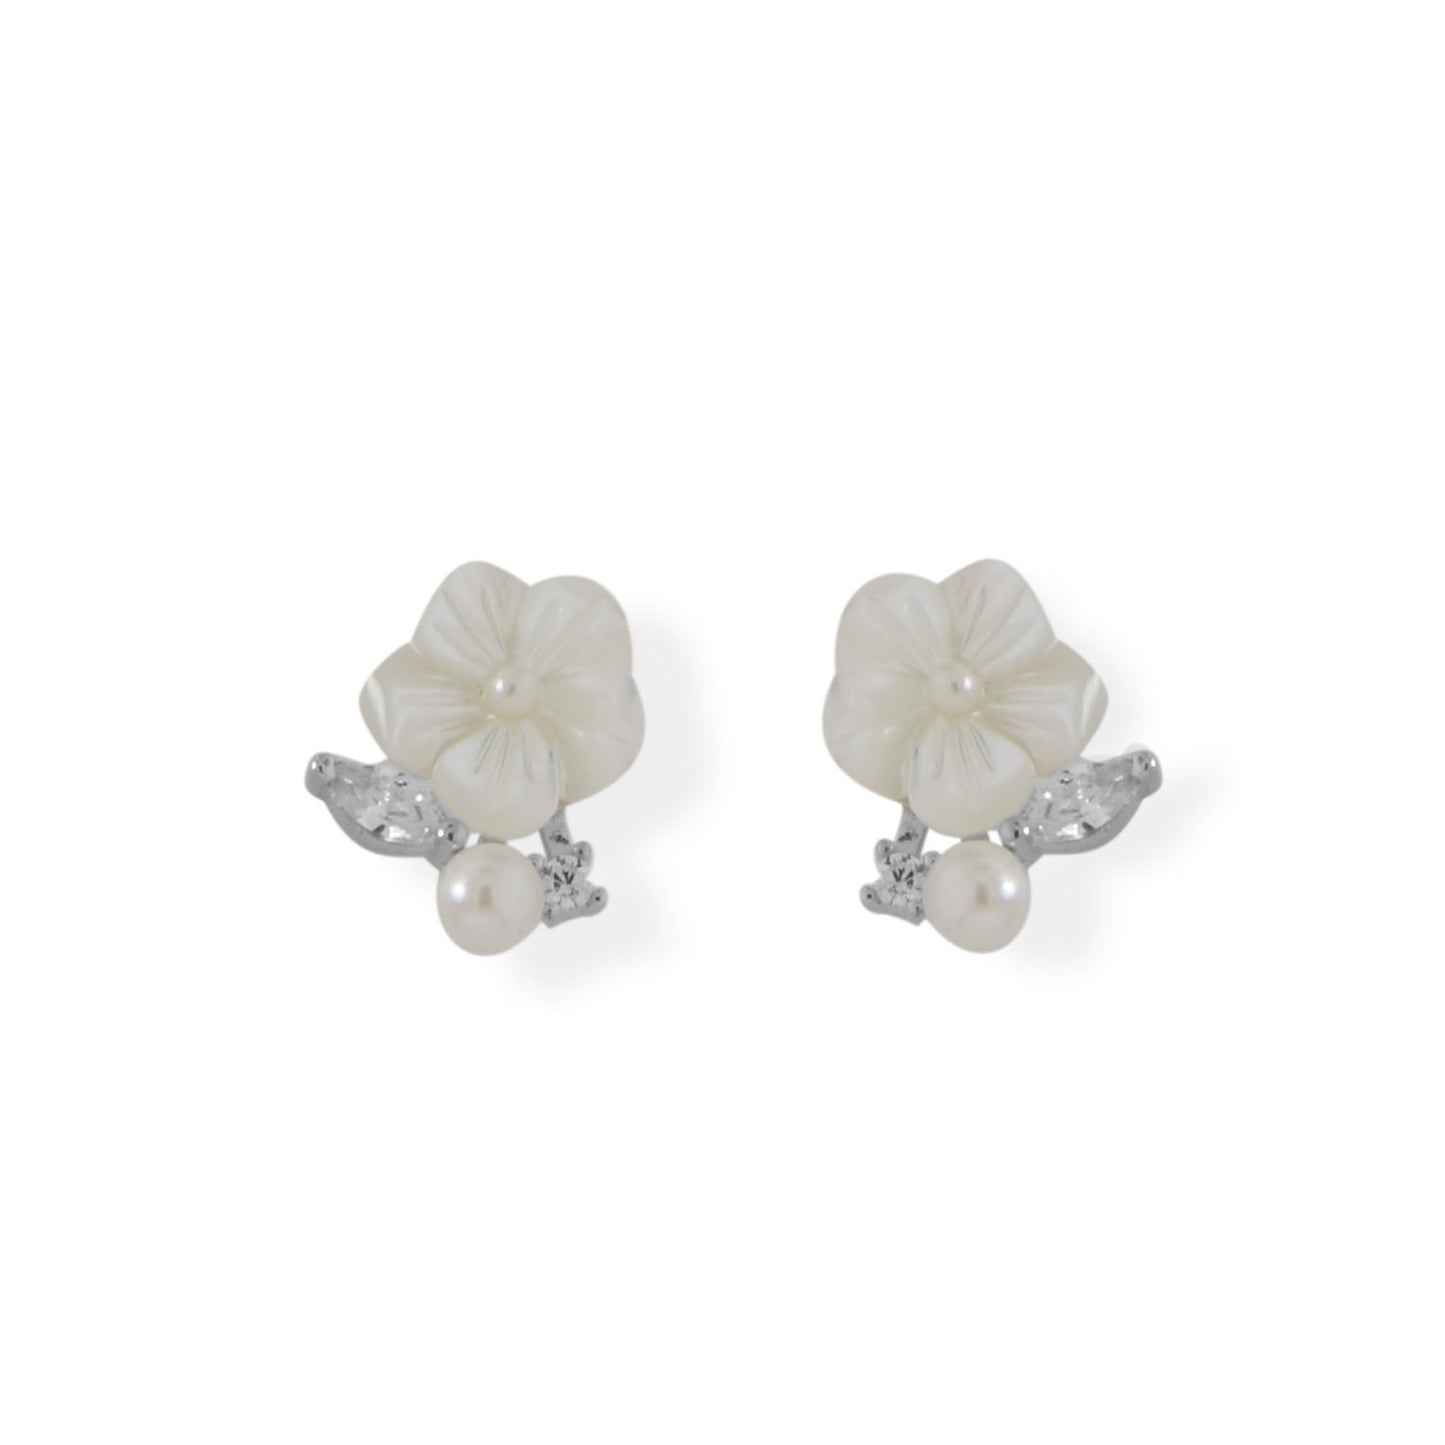 Rhodium Plated Sterling Silver Mother of Pearl and Cubic Zirconia Flower Earrings